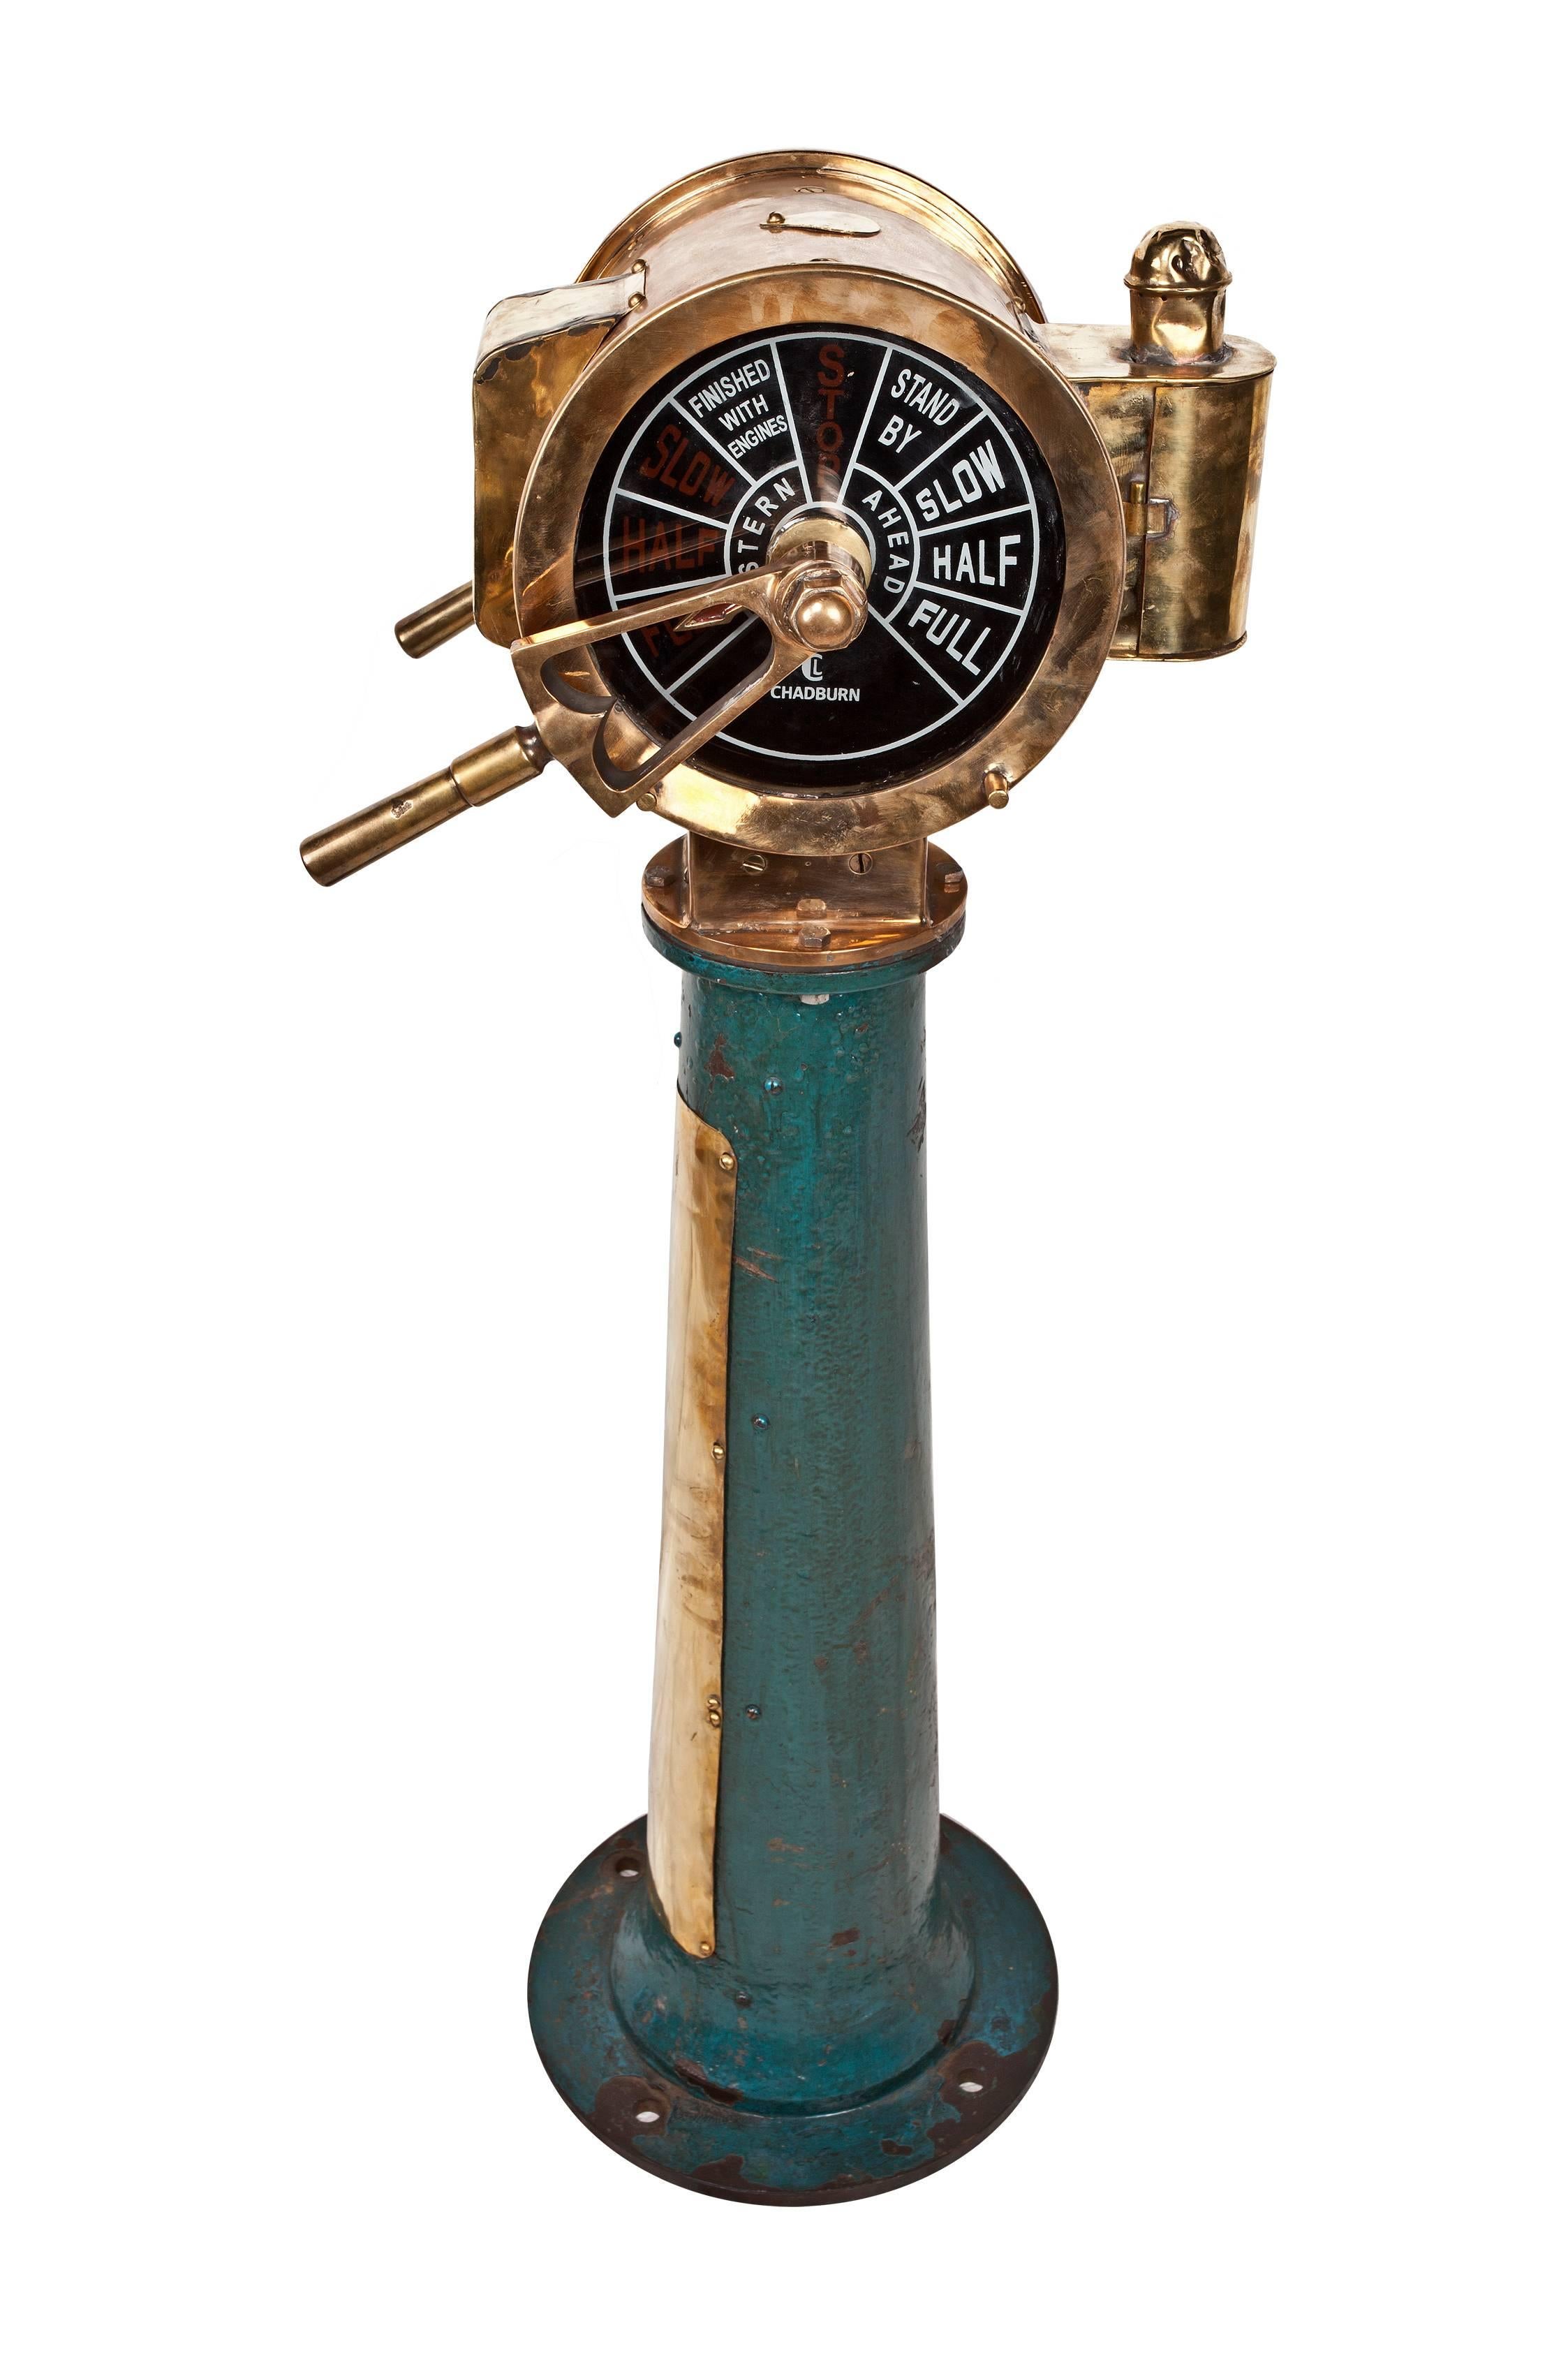 These ship's telegraphs are becoming rare. Modern ships don't use them any more as this is considered old-school technology. This is a double-sided dial, brass Chadburn ship's telegraph with an iron base with original paint. It rings when the handle